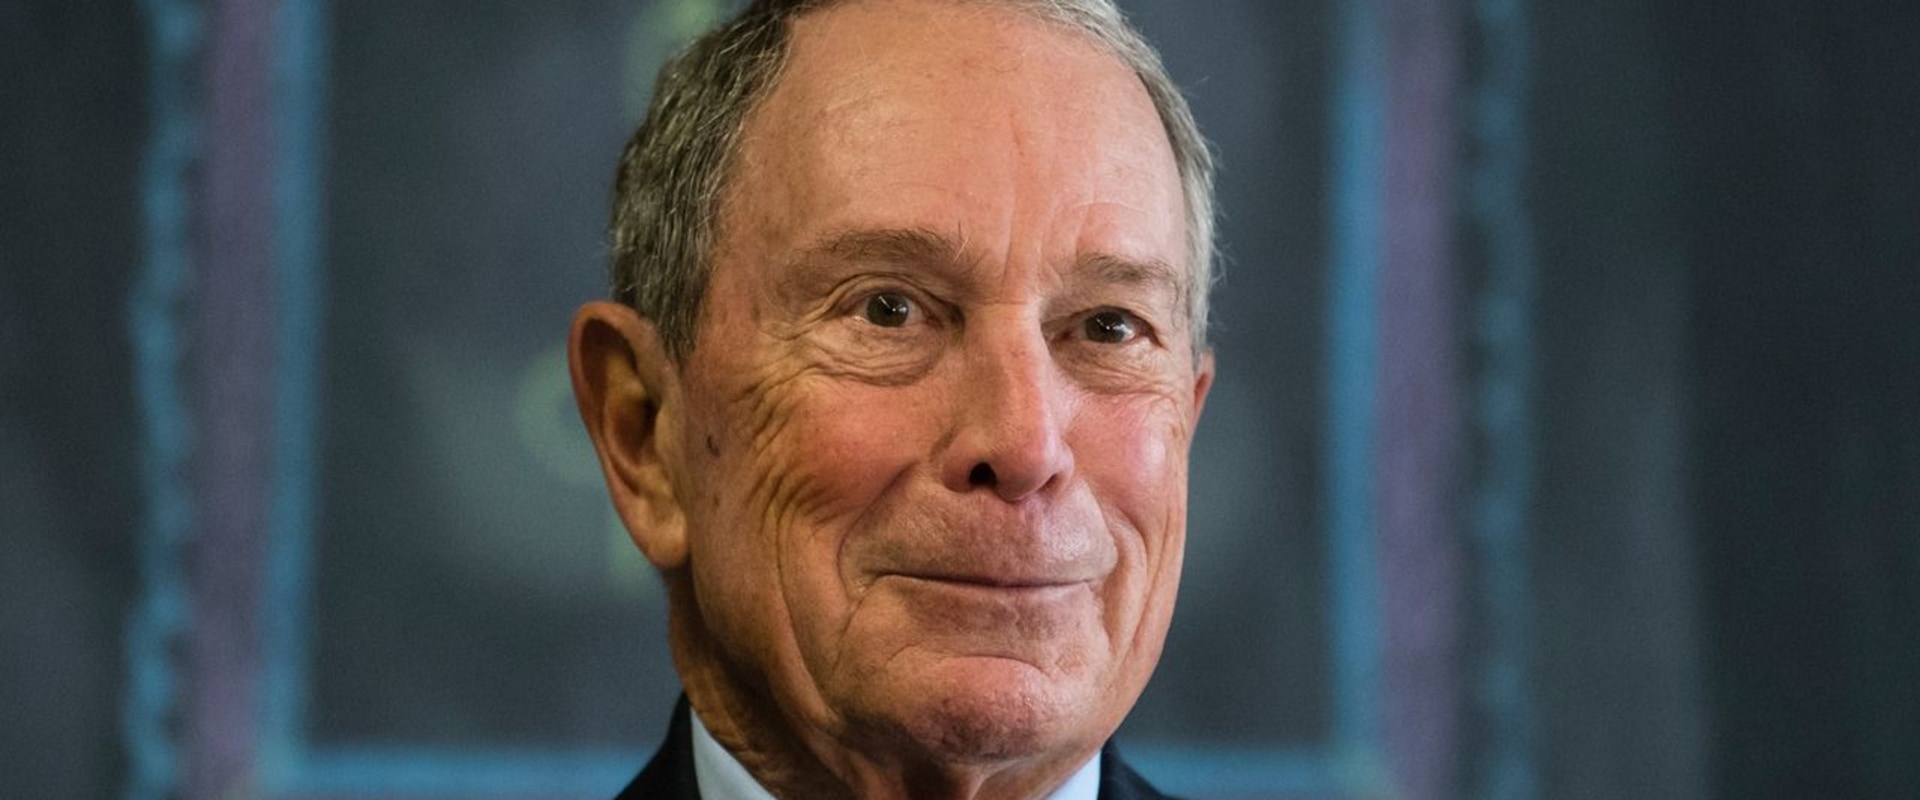 What political party was michael bloomberg affiliated with when he served as mayor of new york city?